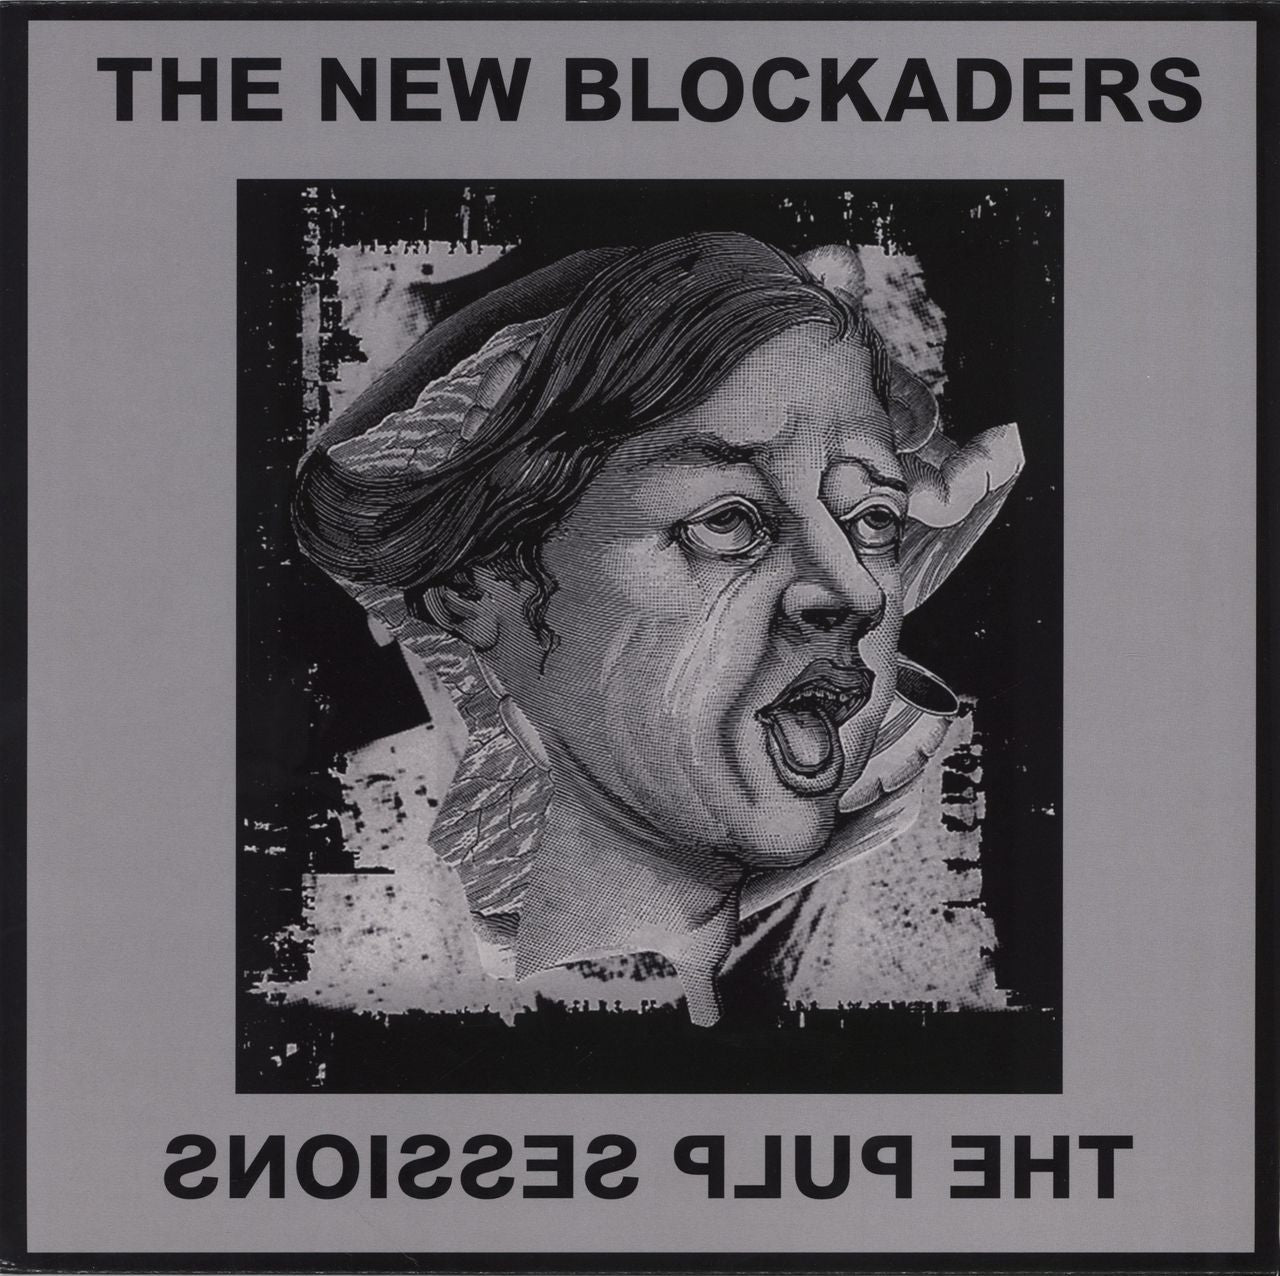 The New Blockaders The Pulp Sessions - Clear Vinyl - Numbered Italian 12" vinyl single (12 inch record / Maxi-single) LH117